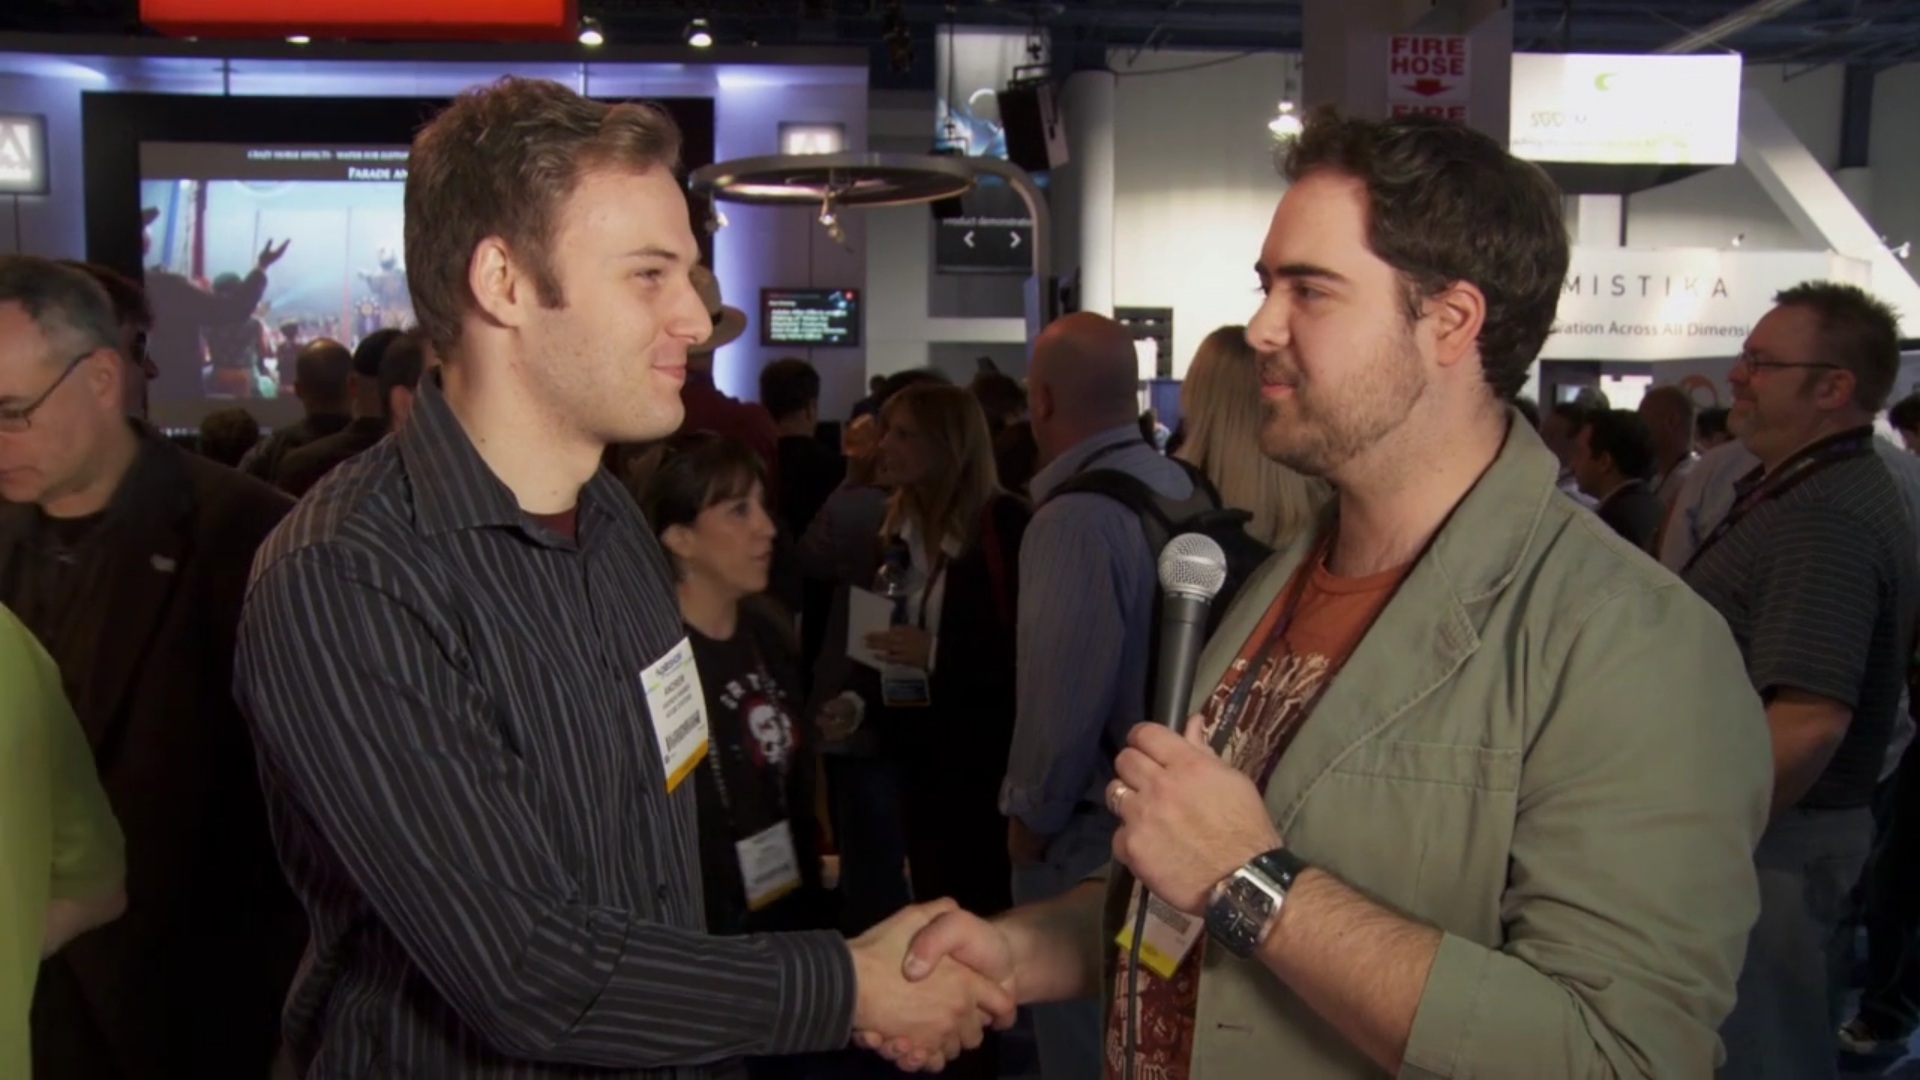 NAB 2012: Interview with Andrew Kramer from Video Copilot